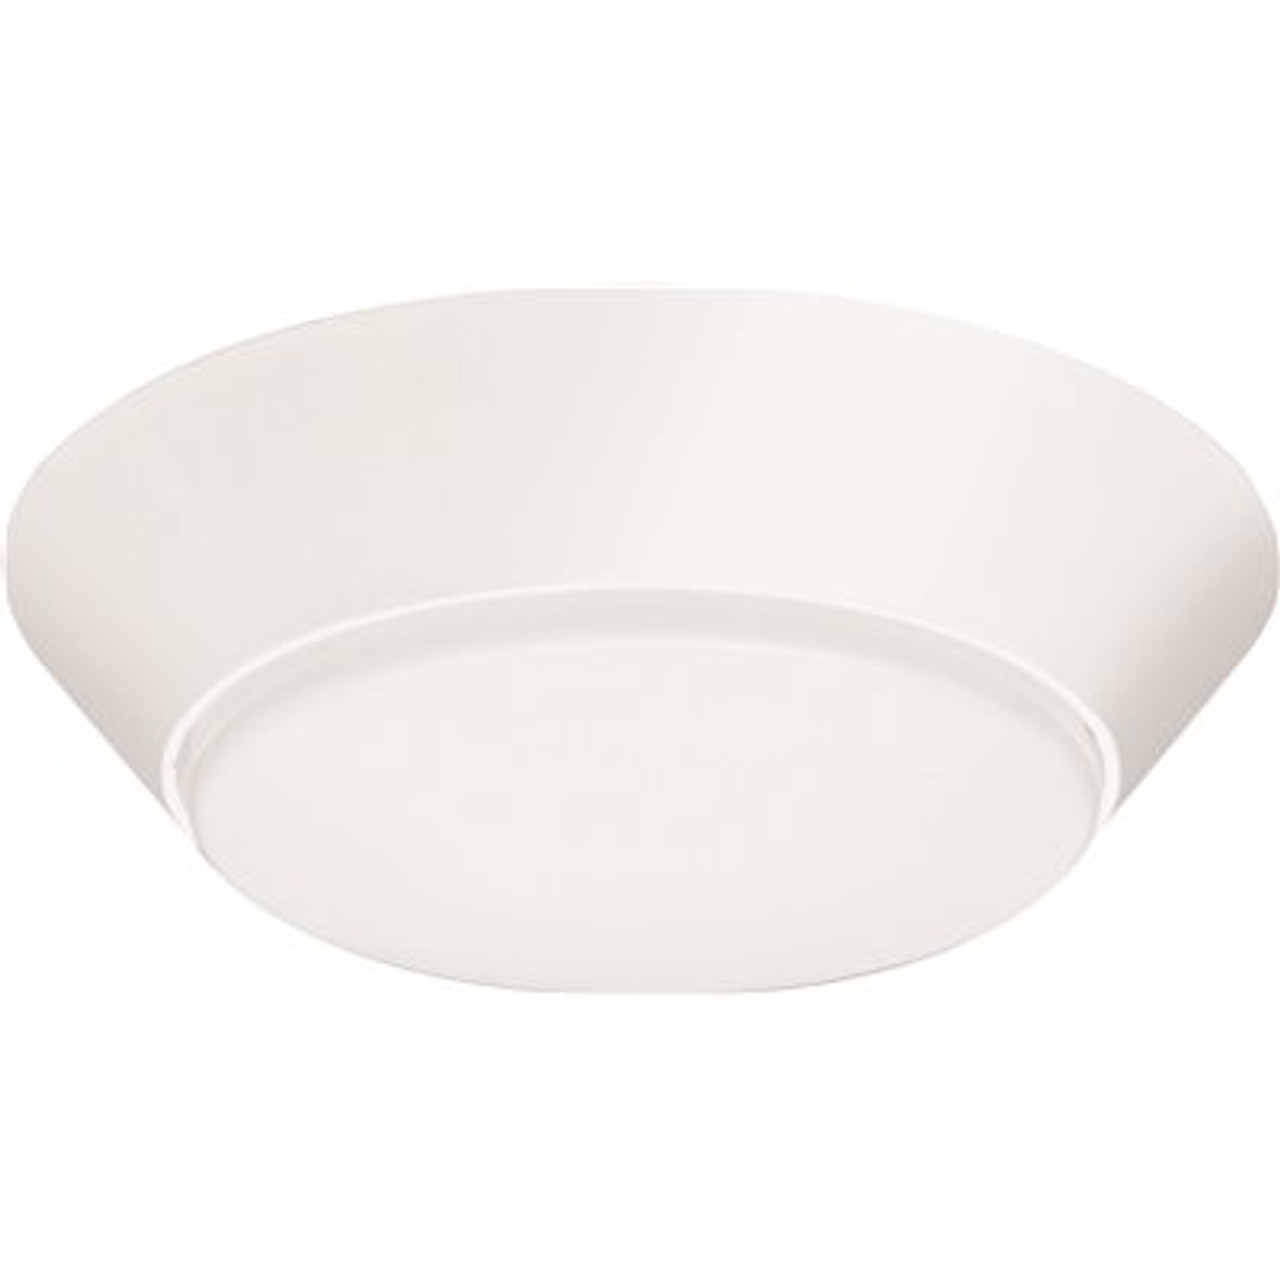 Lithonia Lighting Contractor Select Versi Lite 7 in. Selectable LED 695 Lumen Round Flush Mount Fixture